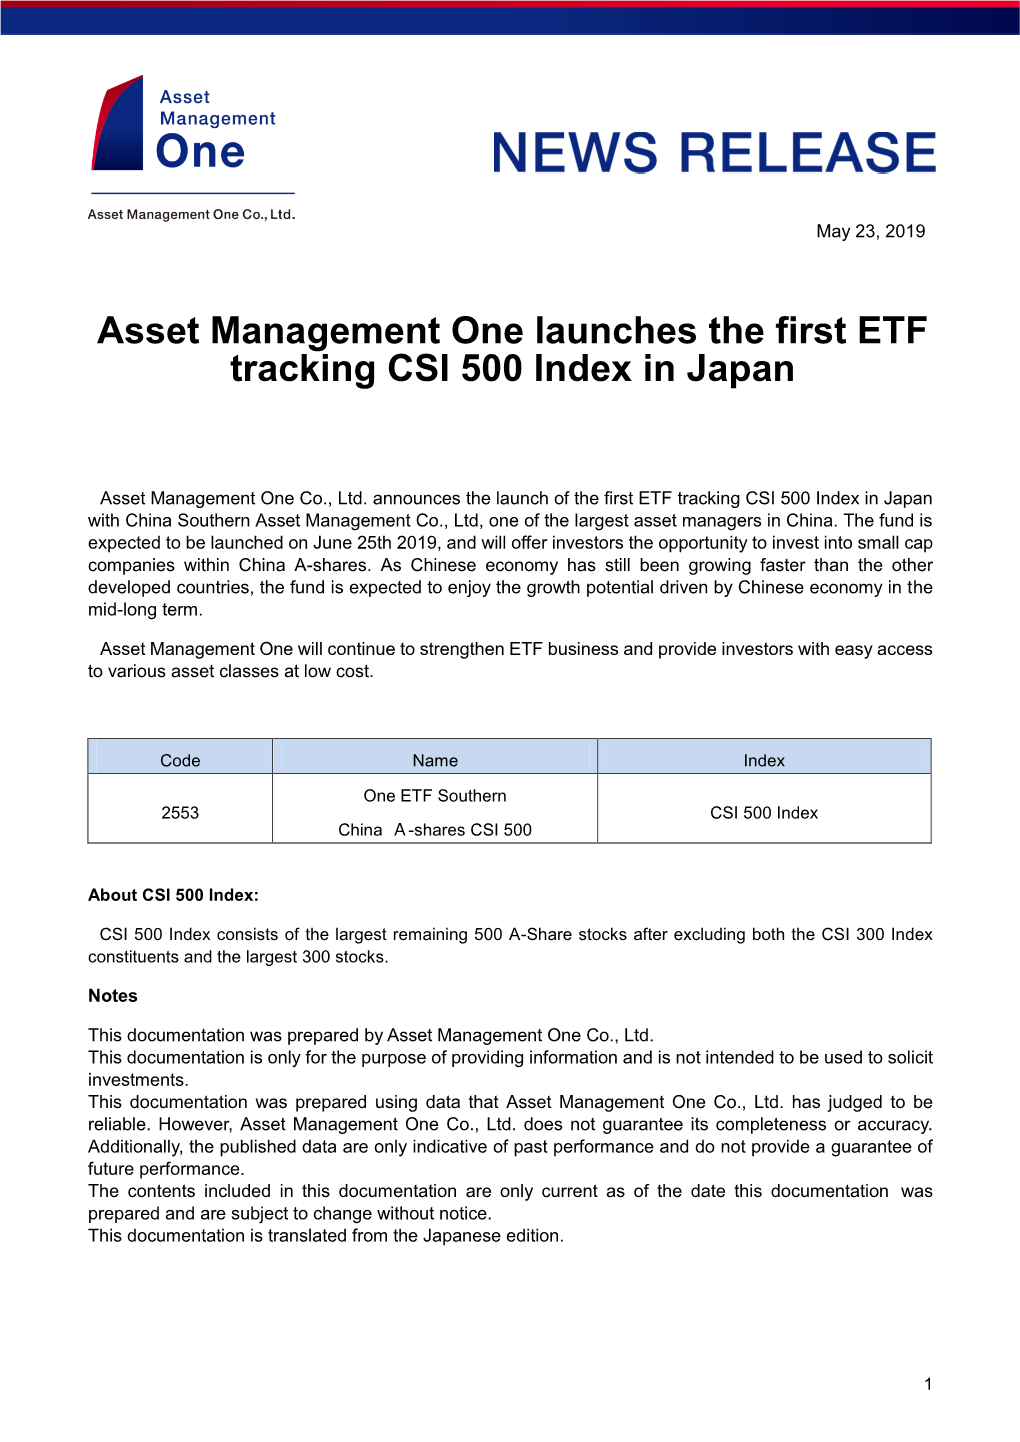 Asset Management One Launches the First ETF Tracking CSI 500 Index in Japan